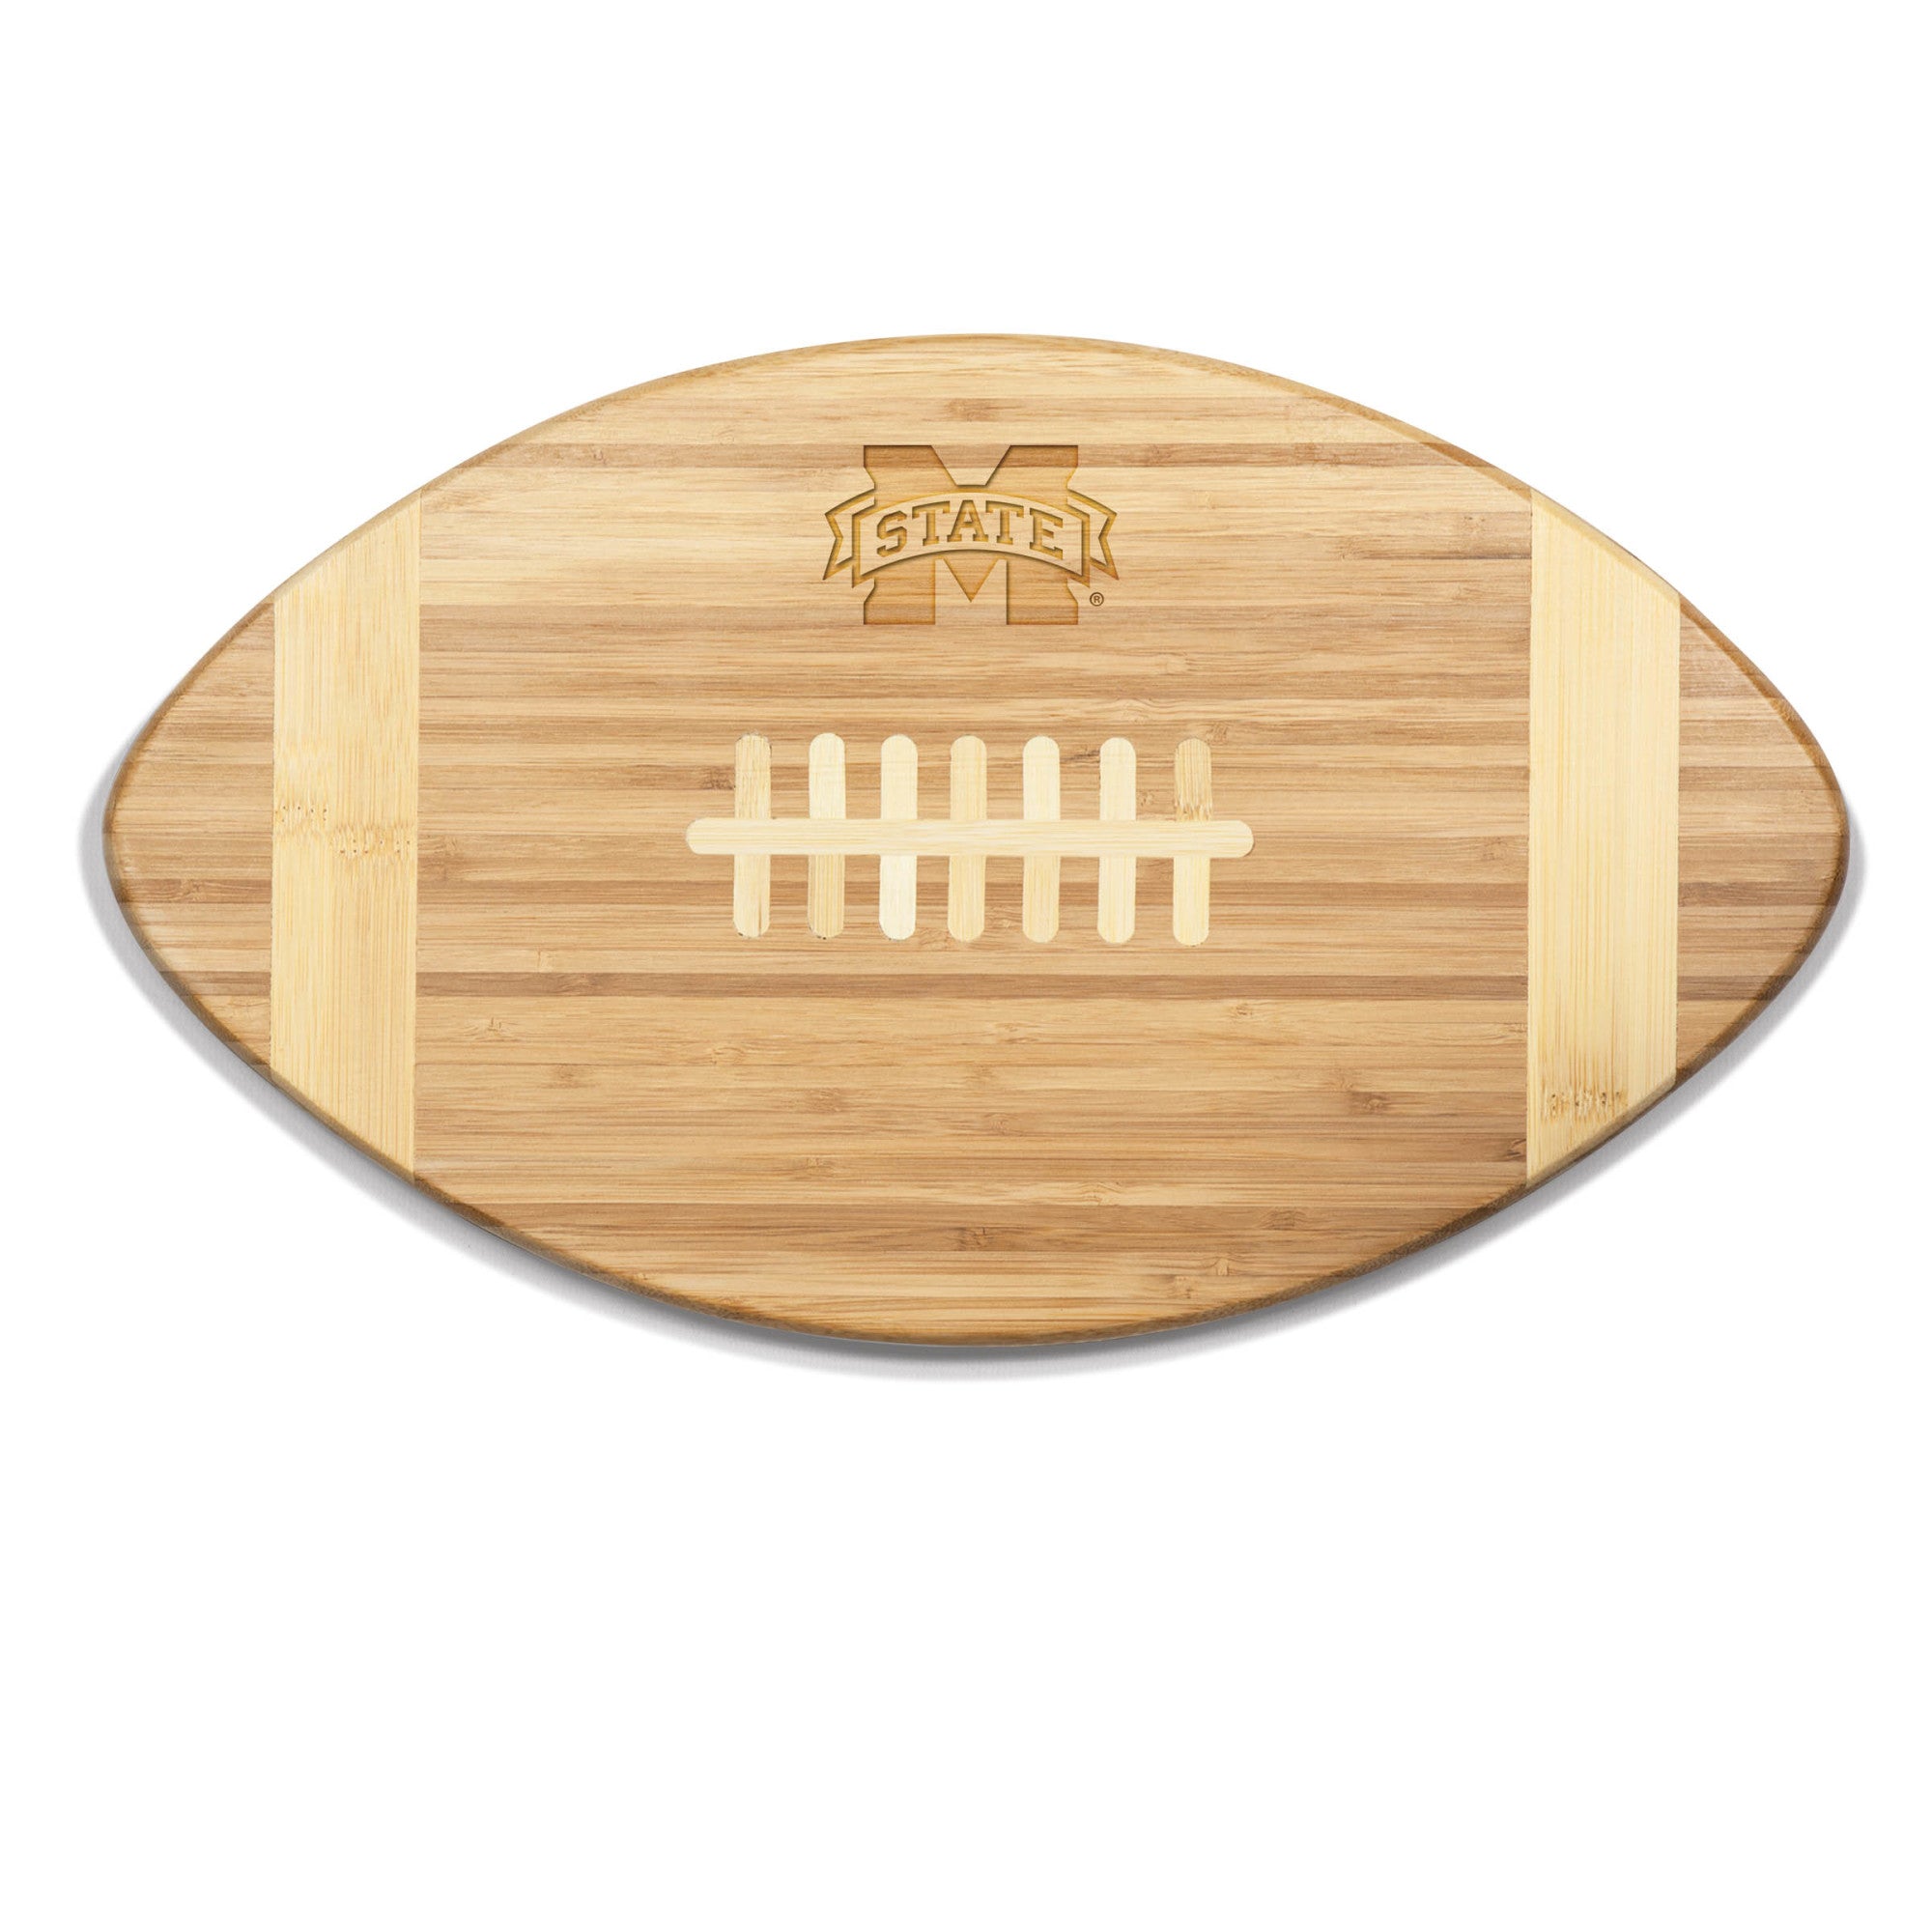 Mississippi State Bulldogs - Touchdown! Football Cutting Board & Serving Tray